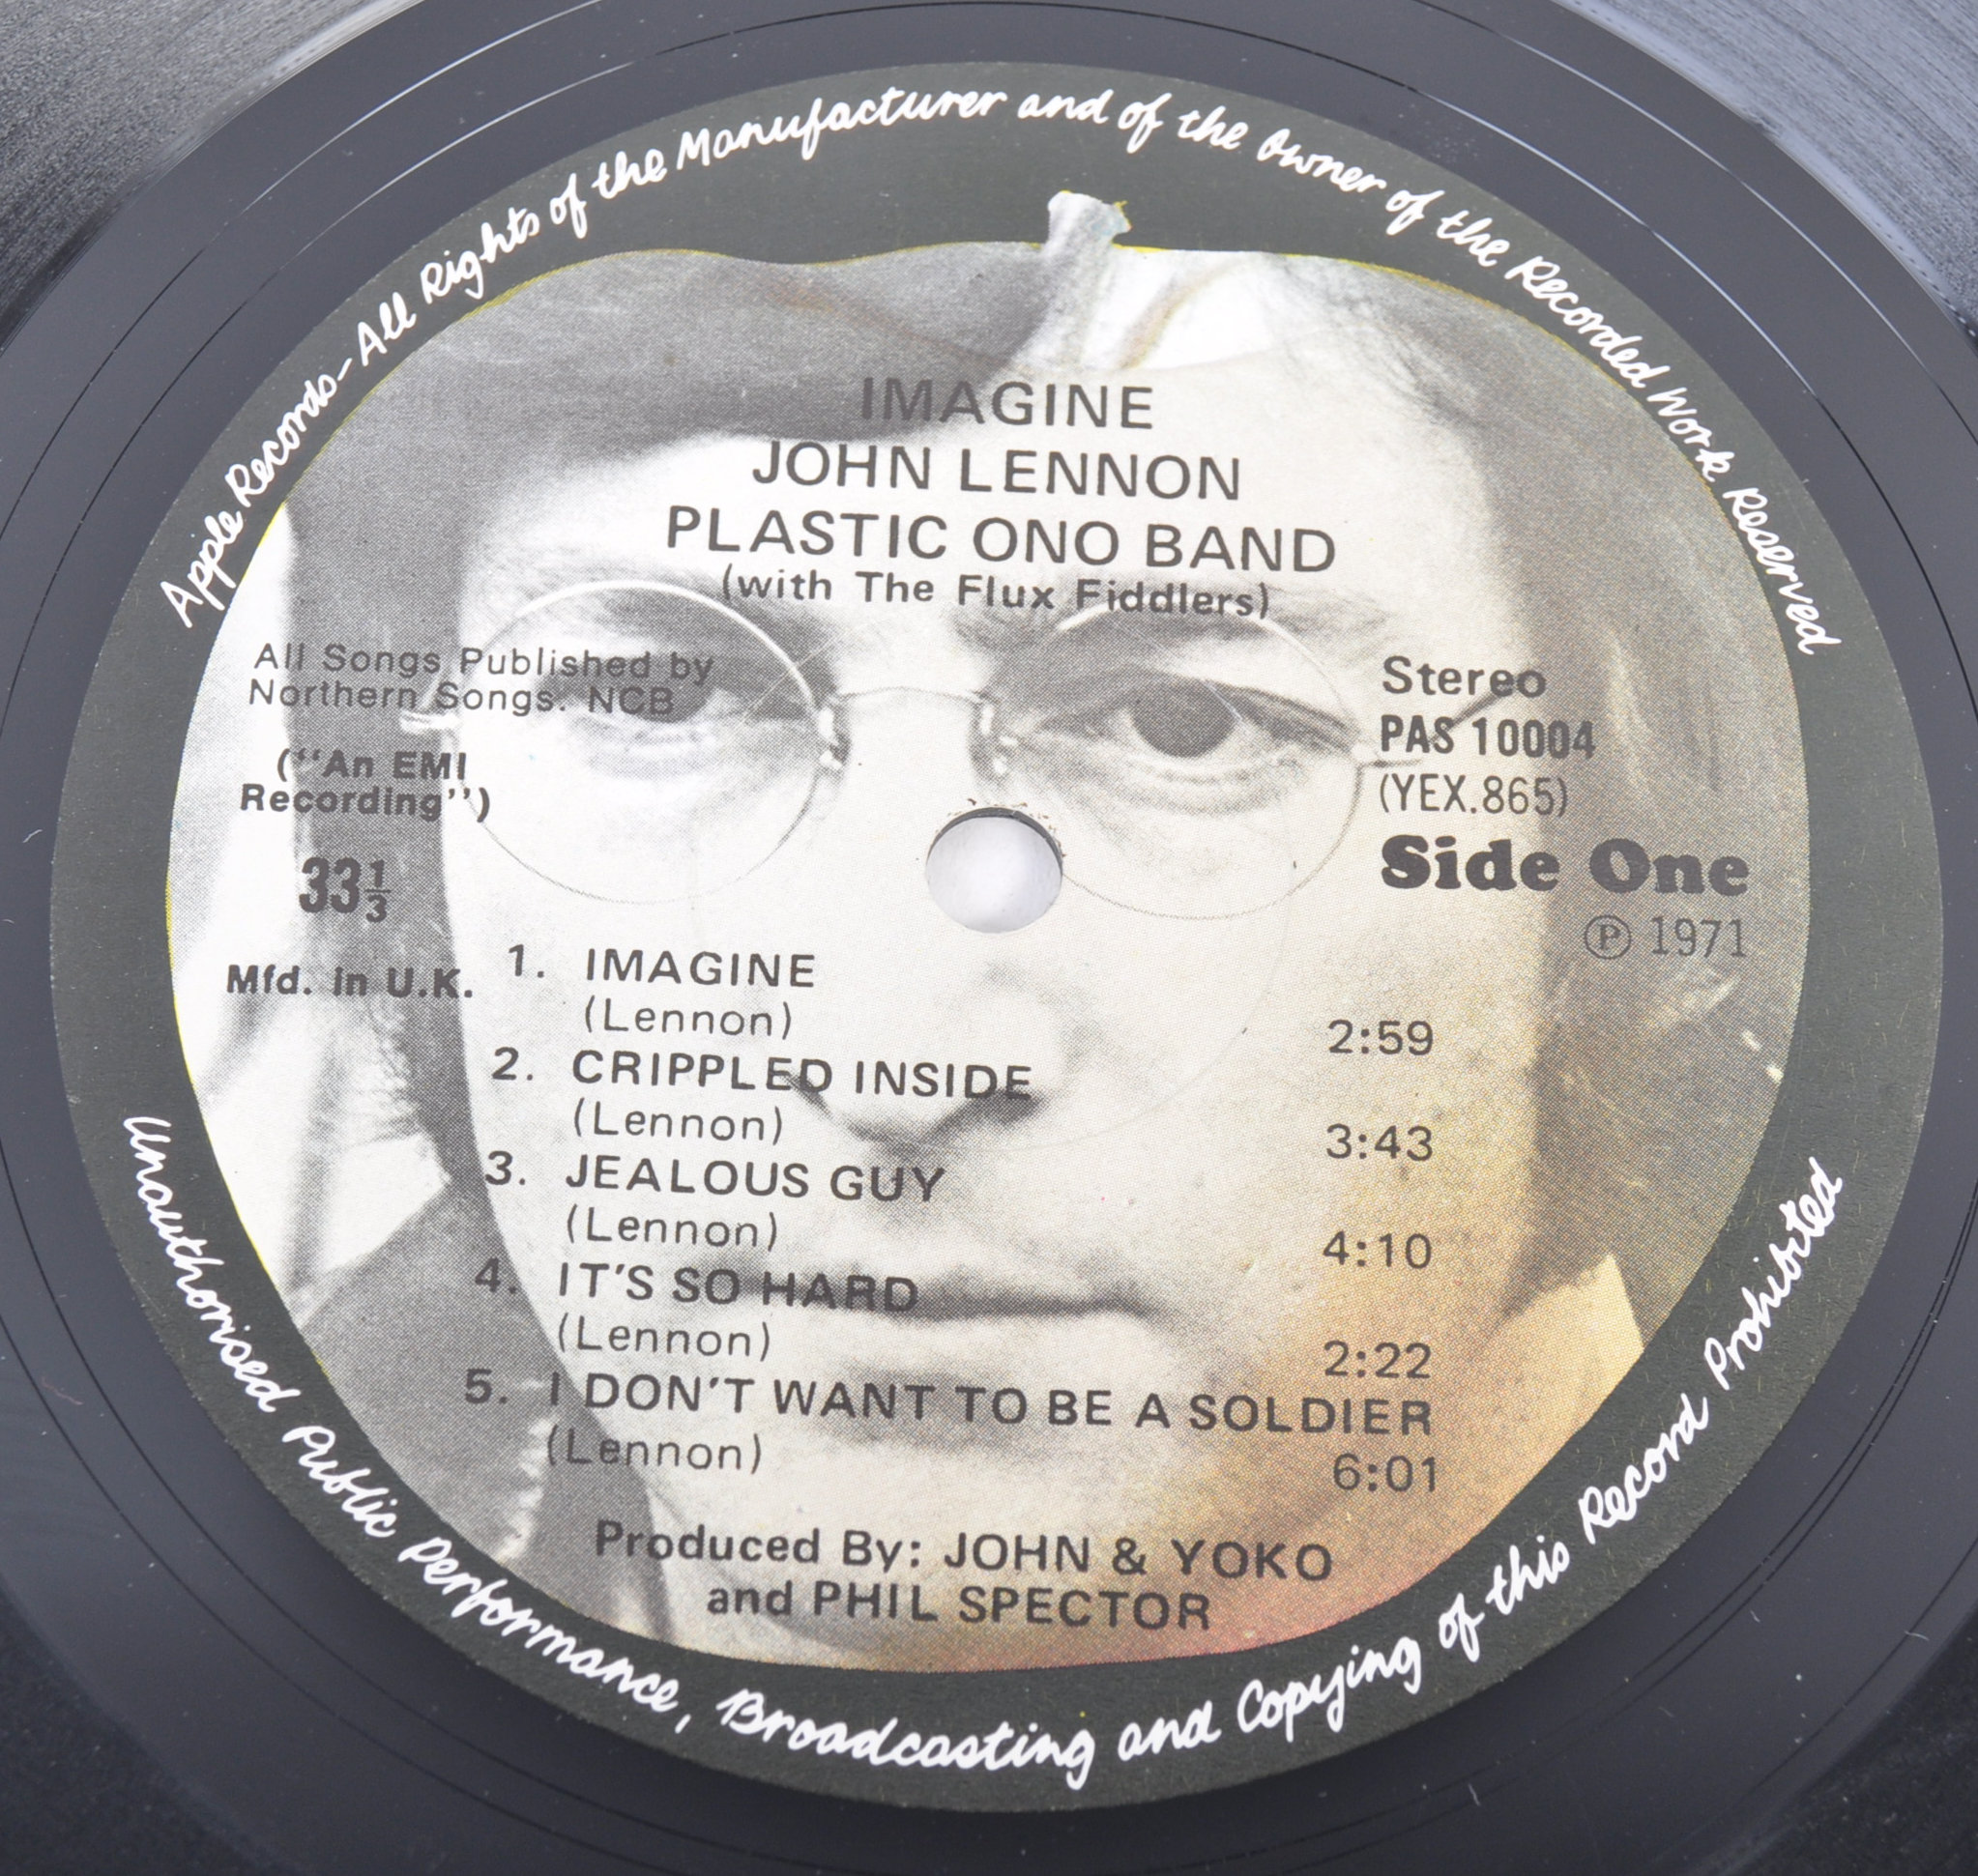 JOHN LENNON PLASTIC ONO BAND - TWO RECORD ALBUMS - LIVE PEACE IN TRONTO 1969 AND IMAGINE - Image 4 of 4